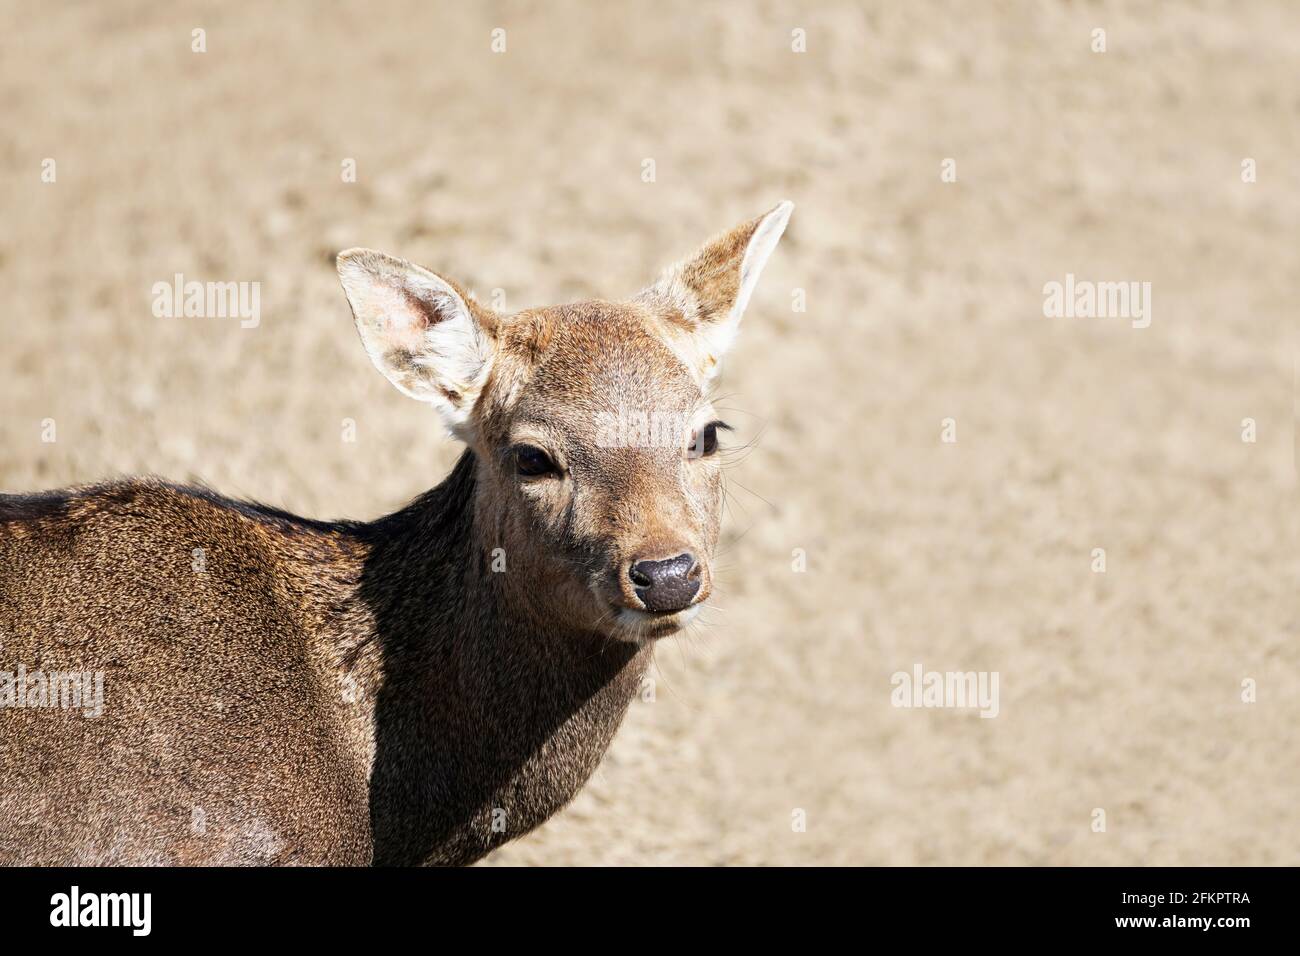 Portrait of a deer with brown fur. Animal looks at the camera. Mammals. Light background. Stock Photo